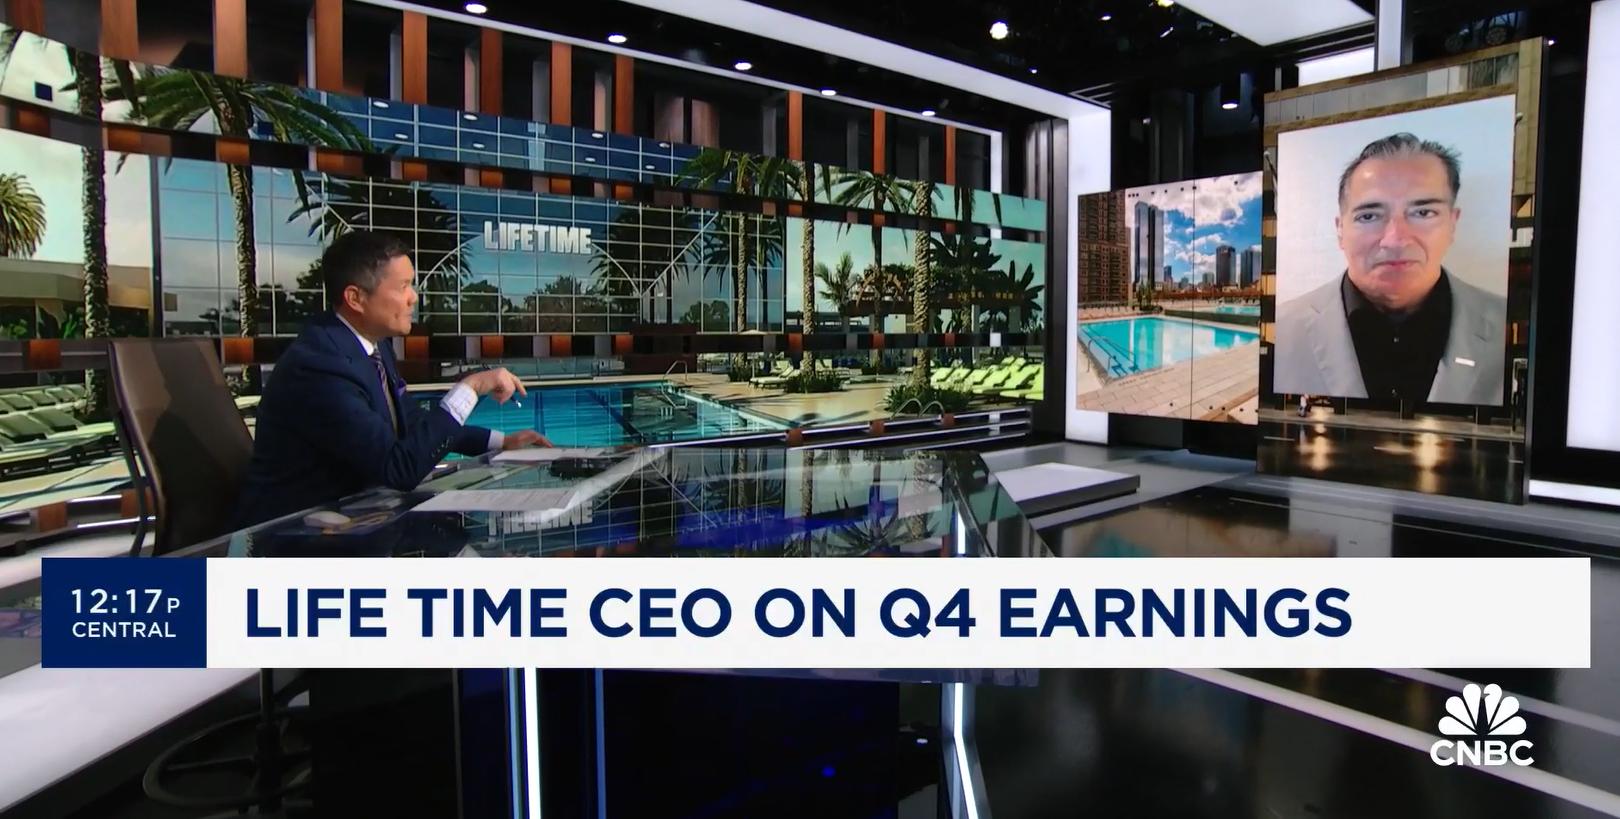 Life Time CEO Bahram Akradi on Q4 earnings and GLP-1 weight-loss drugs